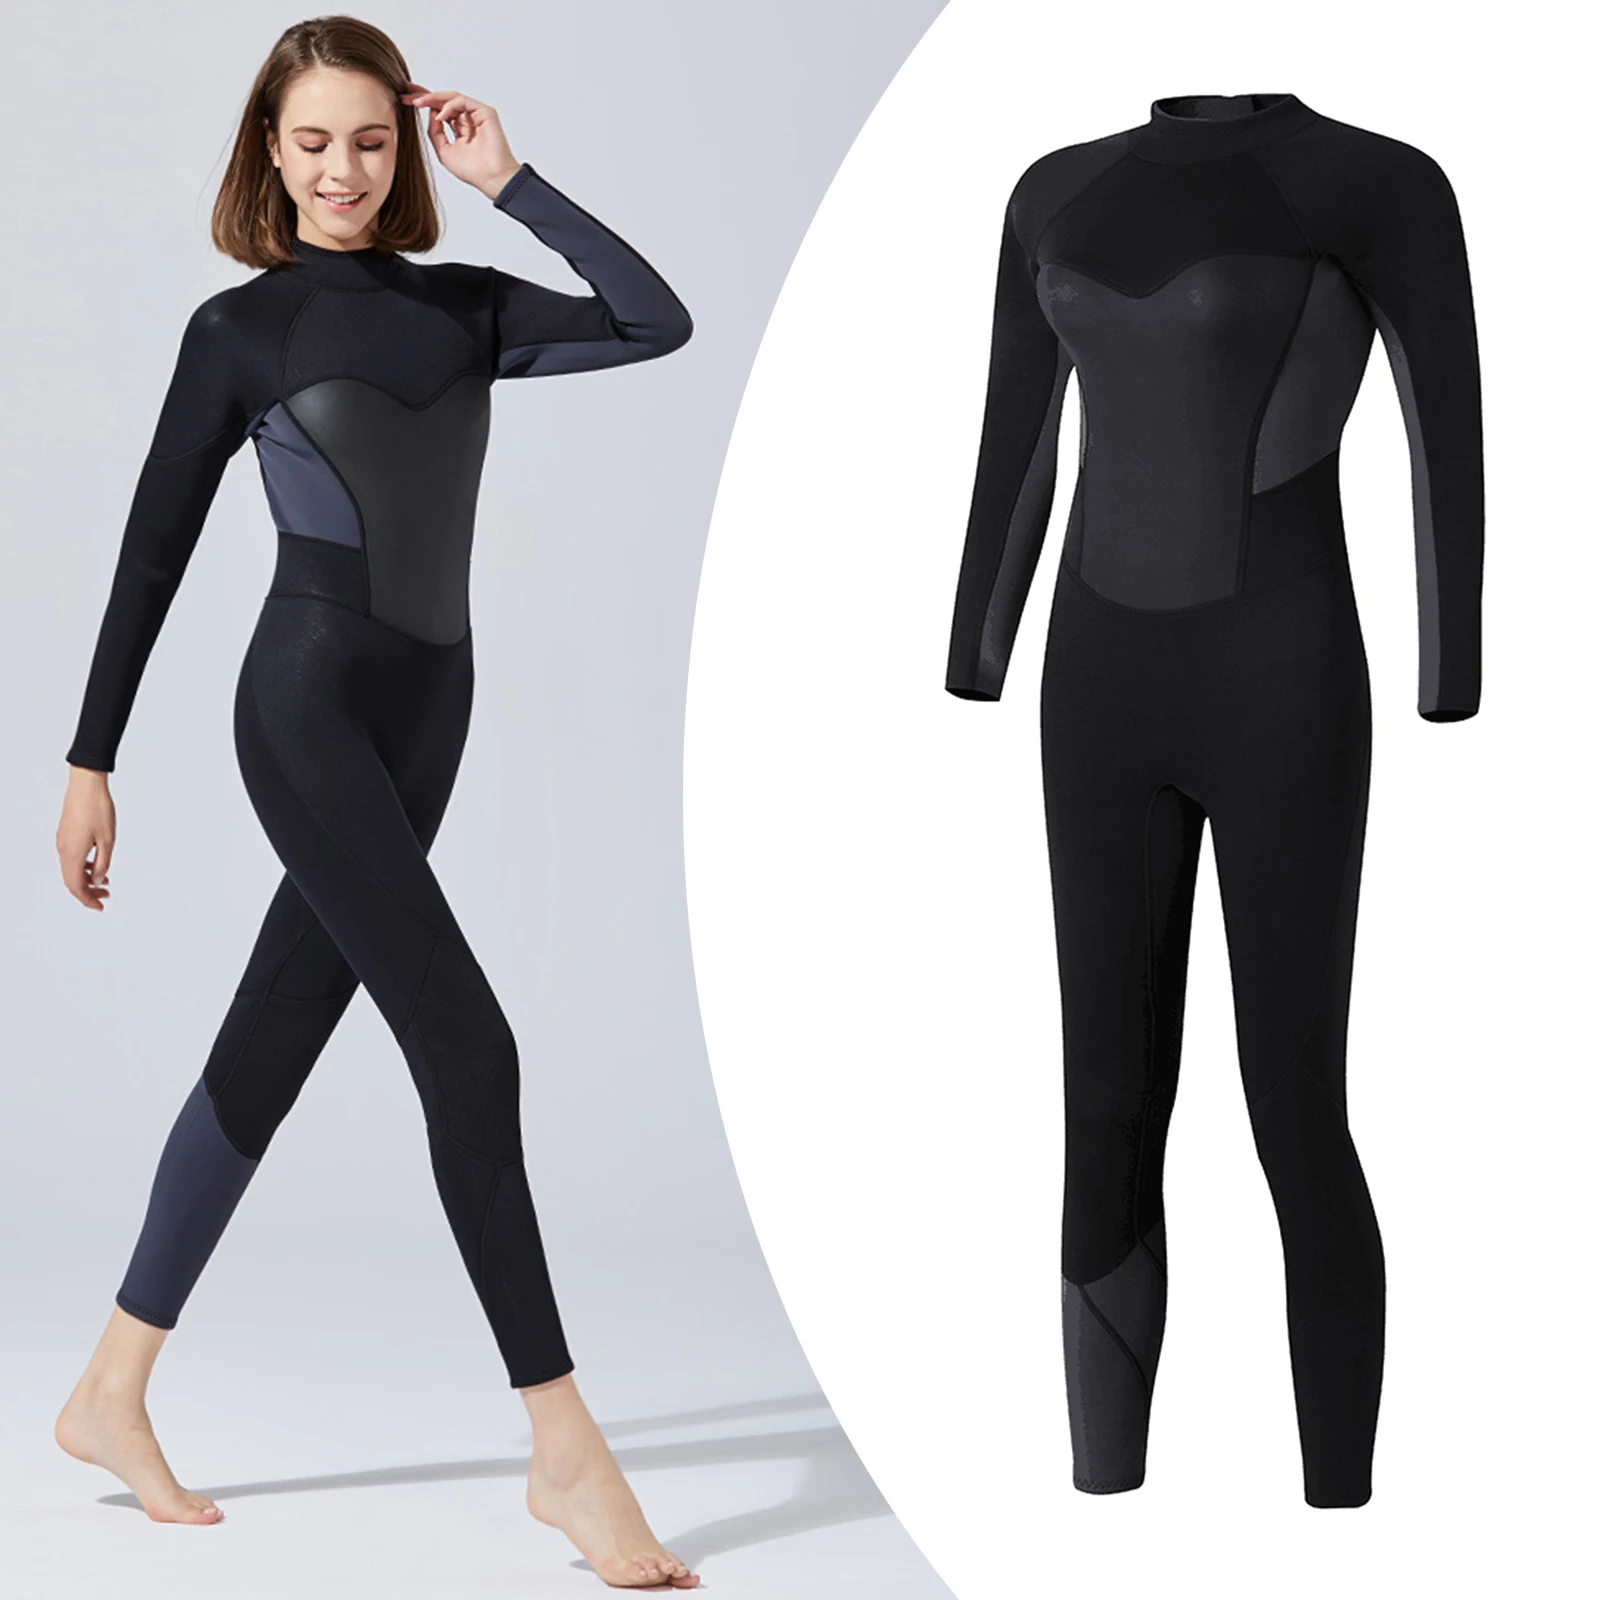 Women Wetsuit 3mm Neoprene Diving Suit Keep Warm Thickened Long Sleeve Full Body Scuba Wet Suit for Surf Snorkeling Swimsuit